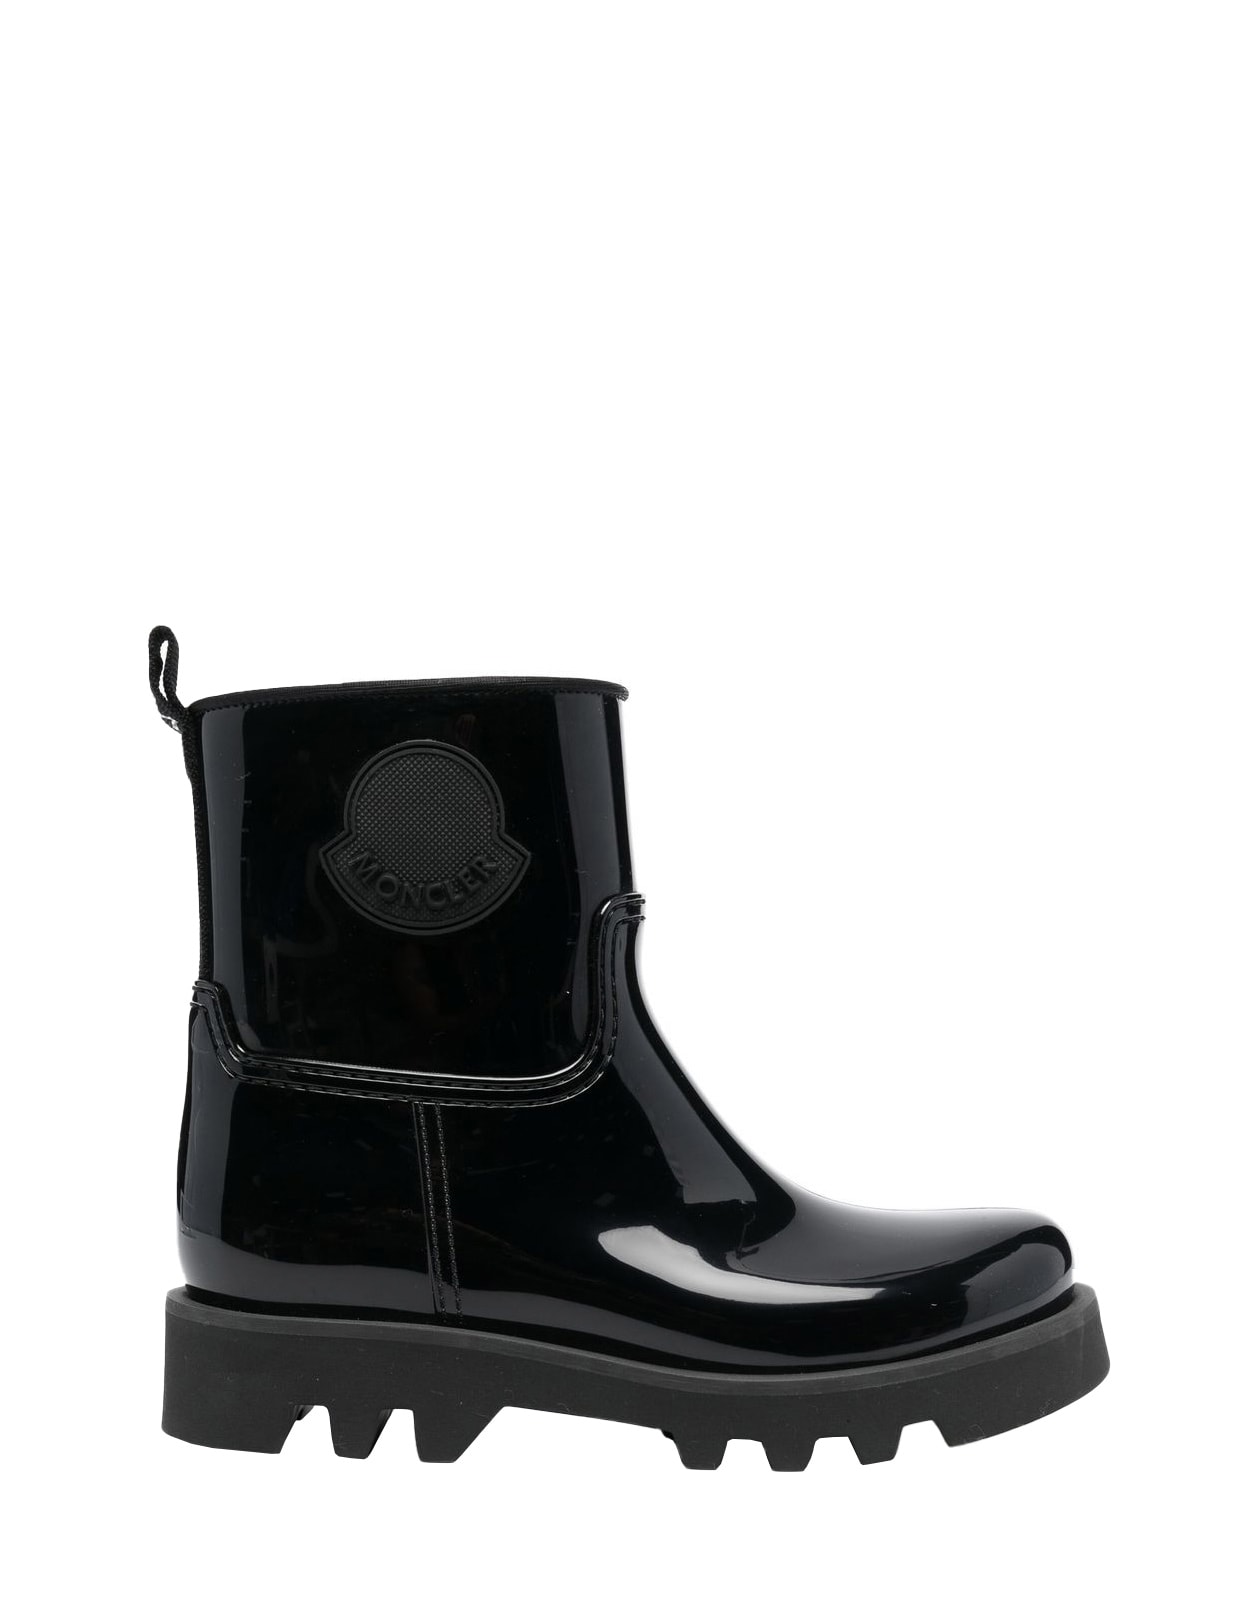 MONCLER WOMAN GINETTE SHINY BLACK ANKLE BOOT